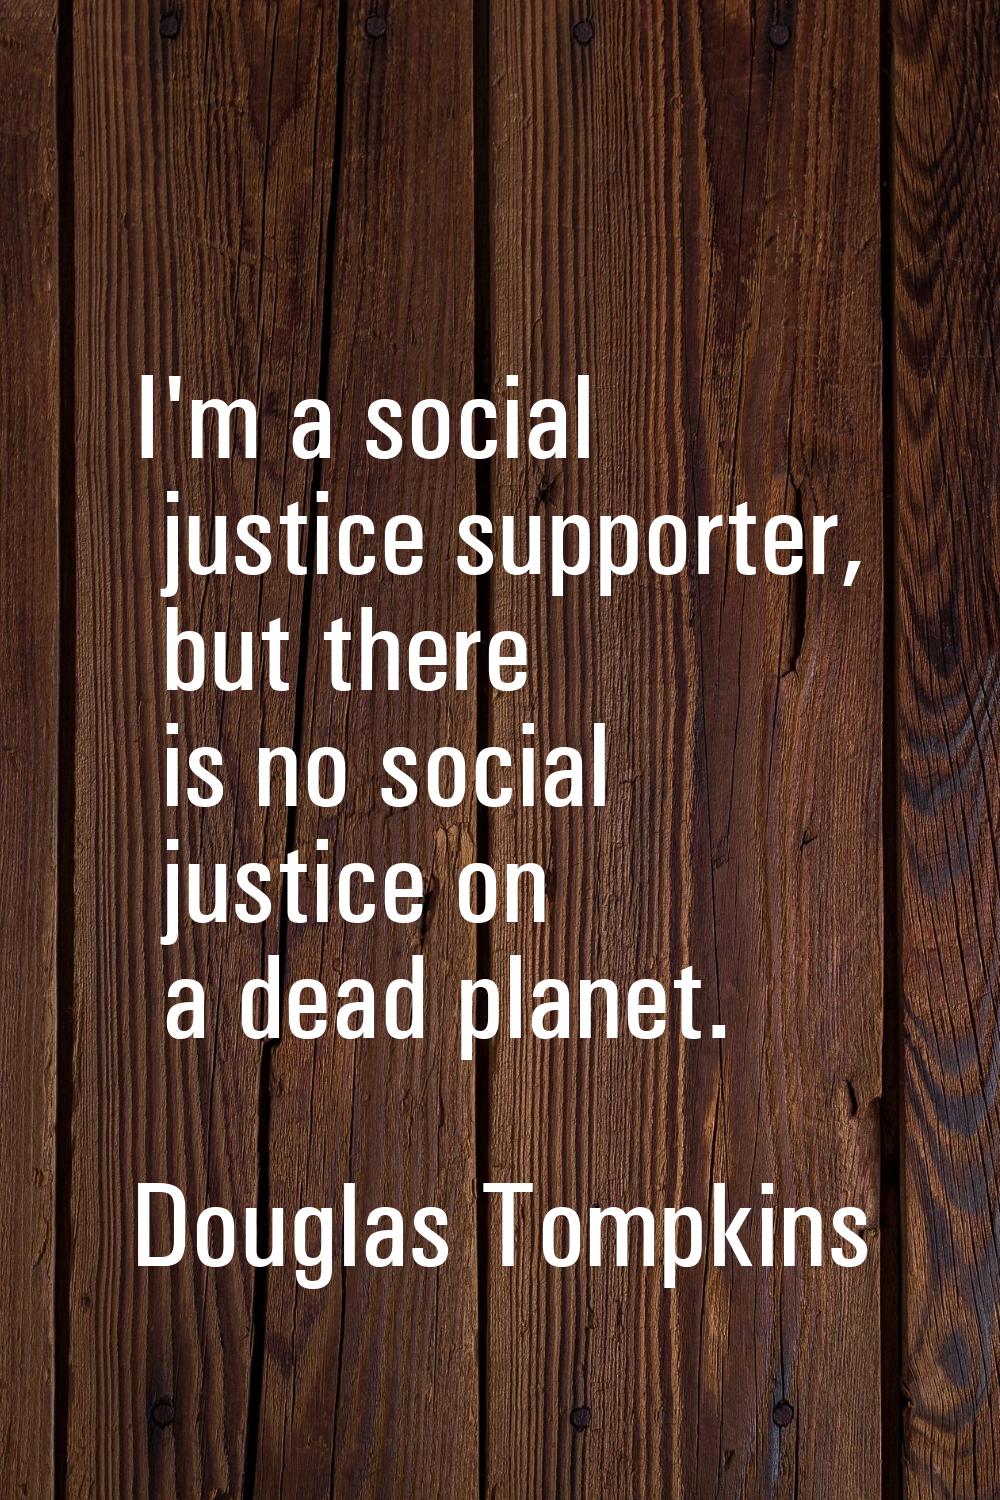 I'm a social justice supporter, but there is no social justice on a dead planet.